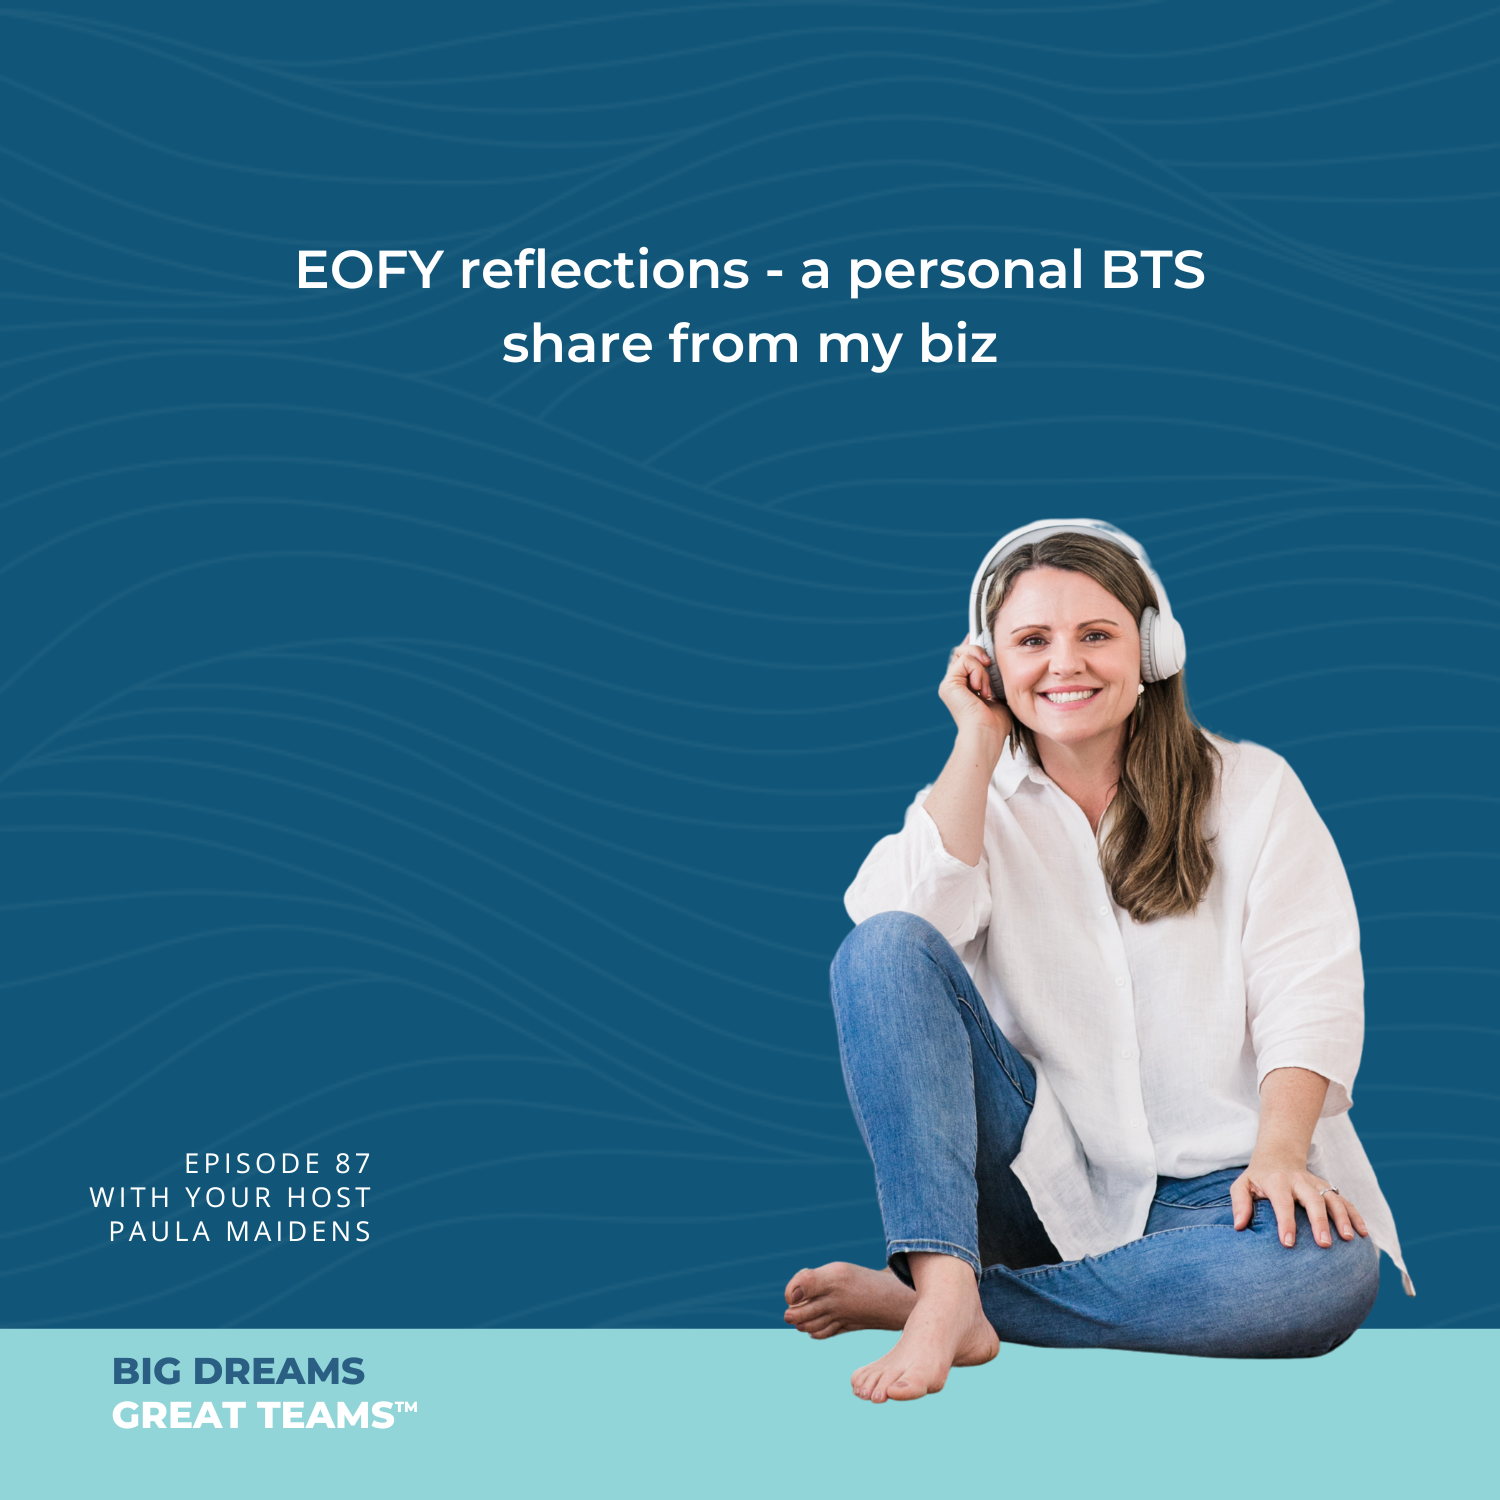 Episode #87 EOFY reflections - a personal BTS share from my biz